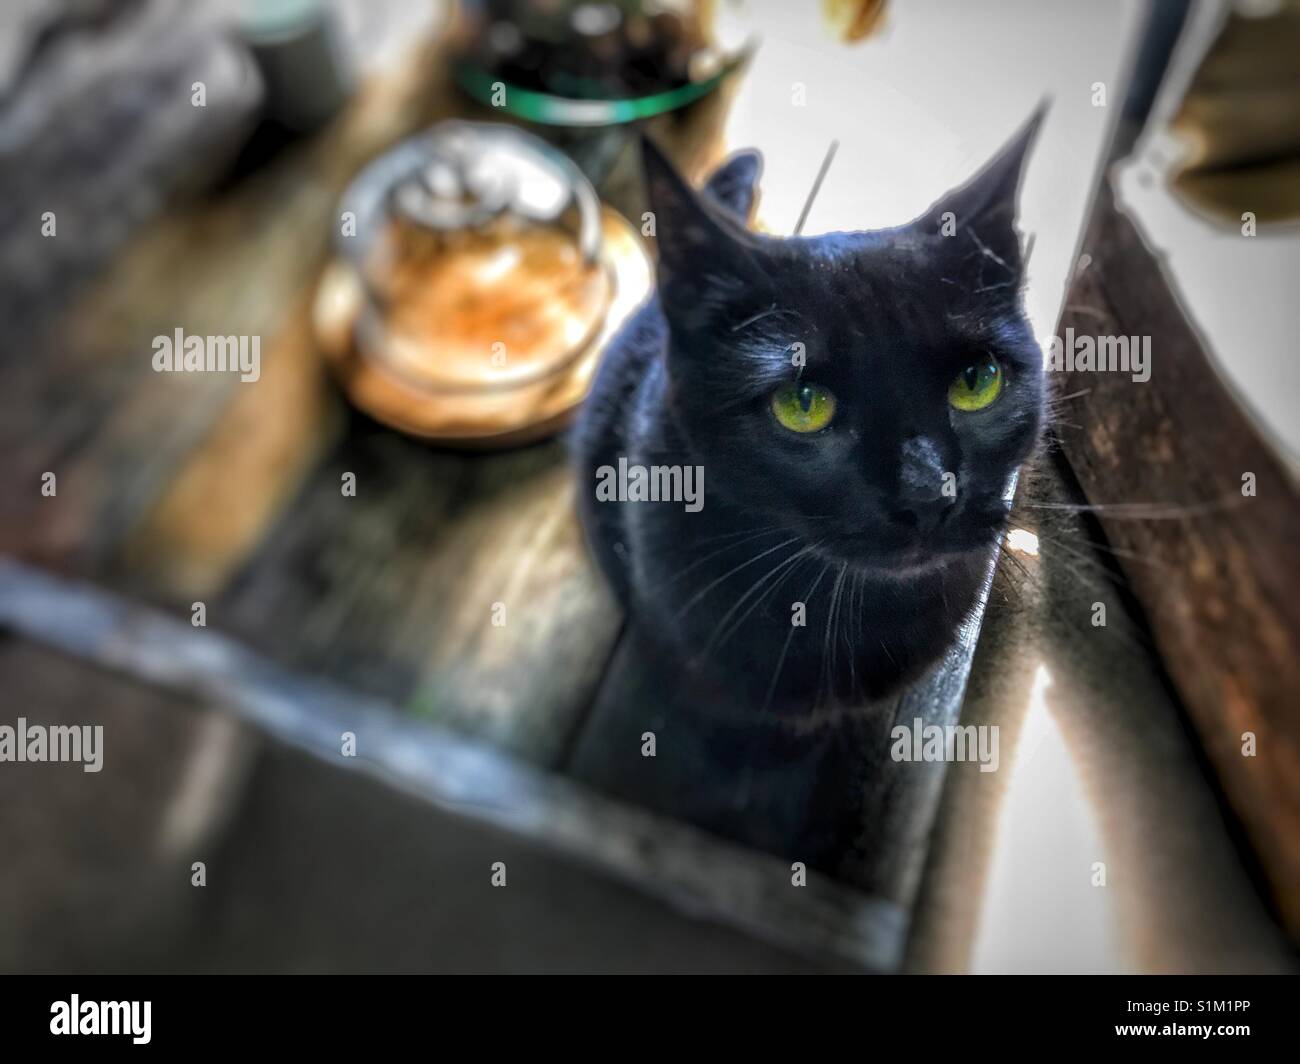 Black cat with expressive eyes sitting on table Stock Photo